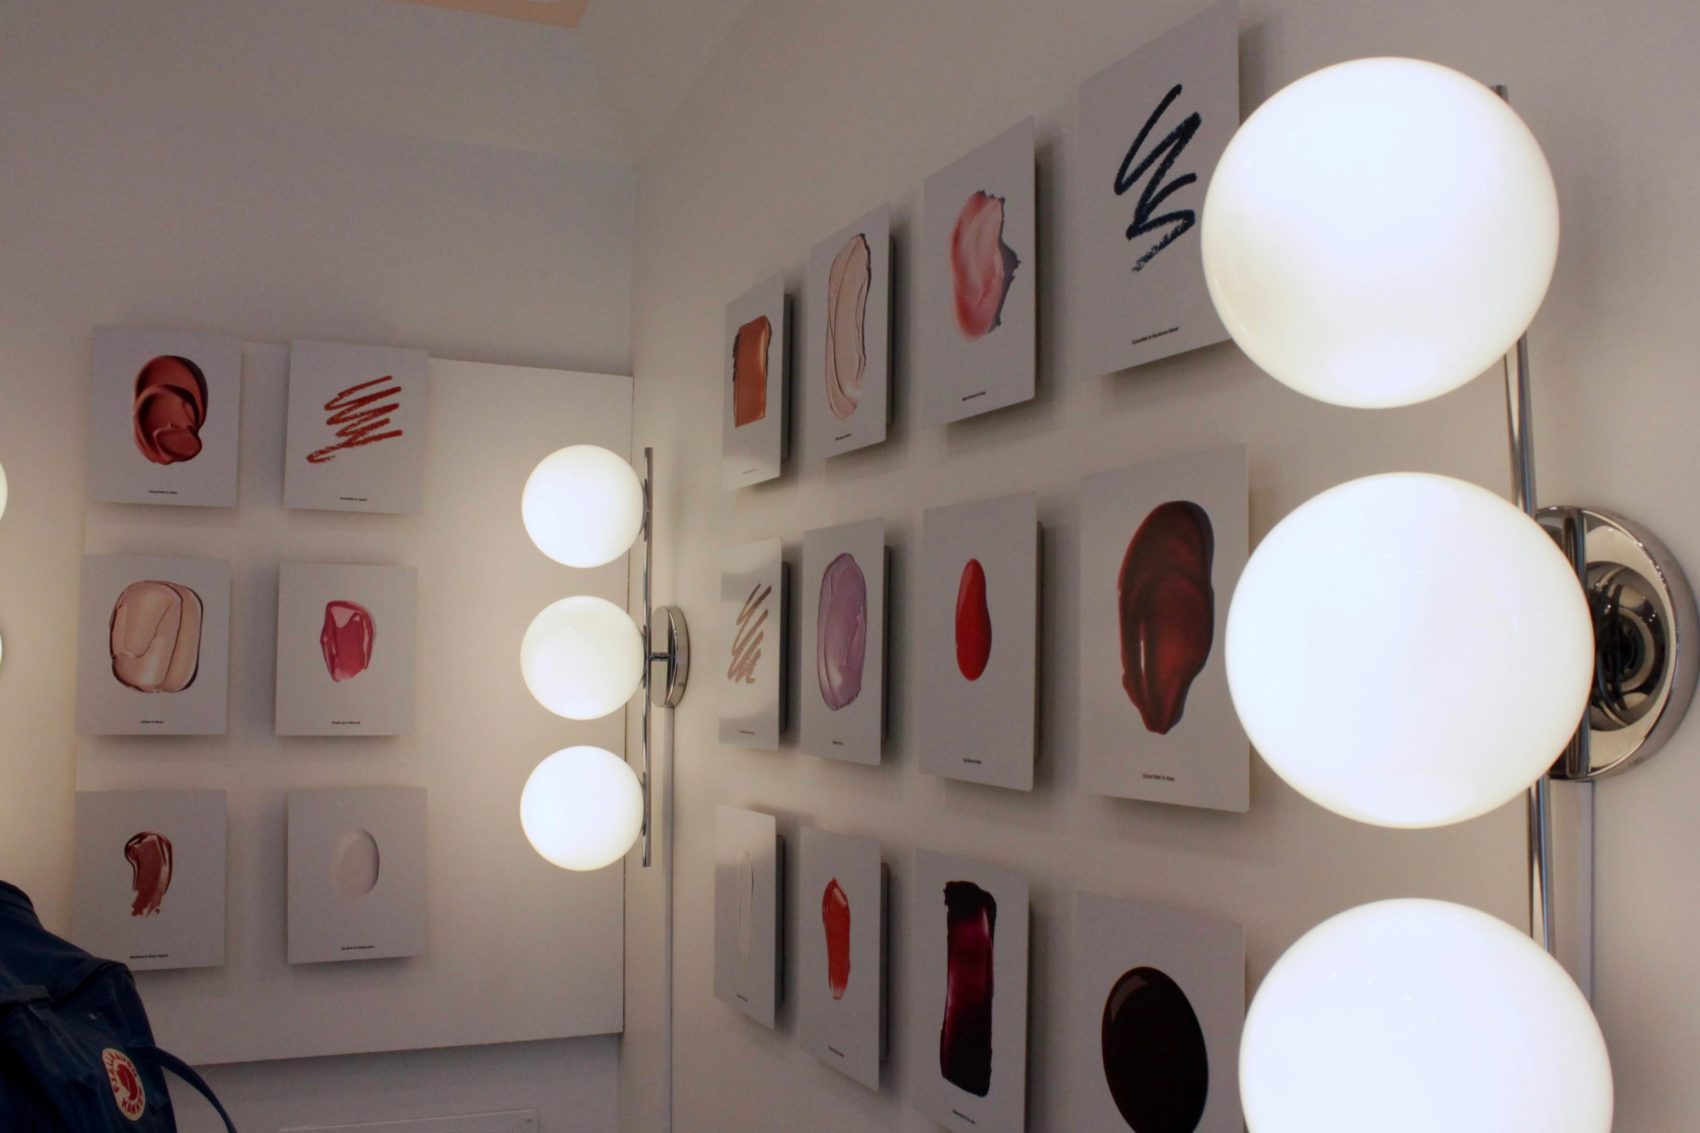 The interior of one of Glossier's makeup rooms. (Meghan B. Kelly/WBUR)